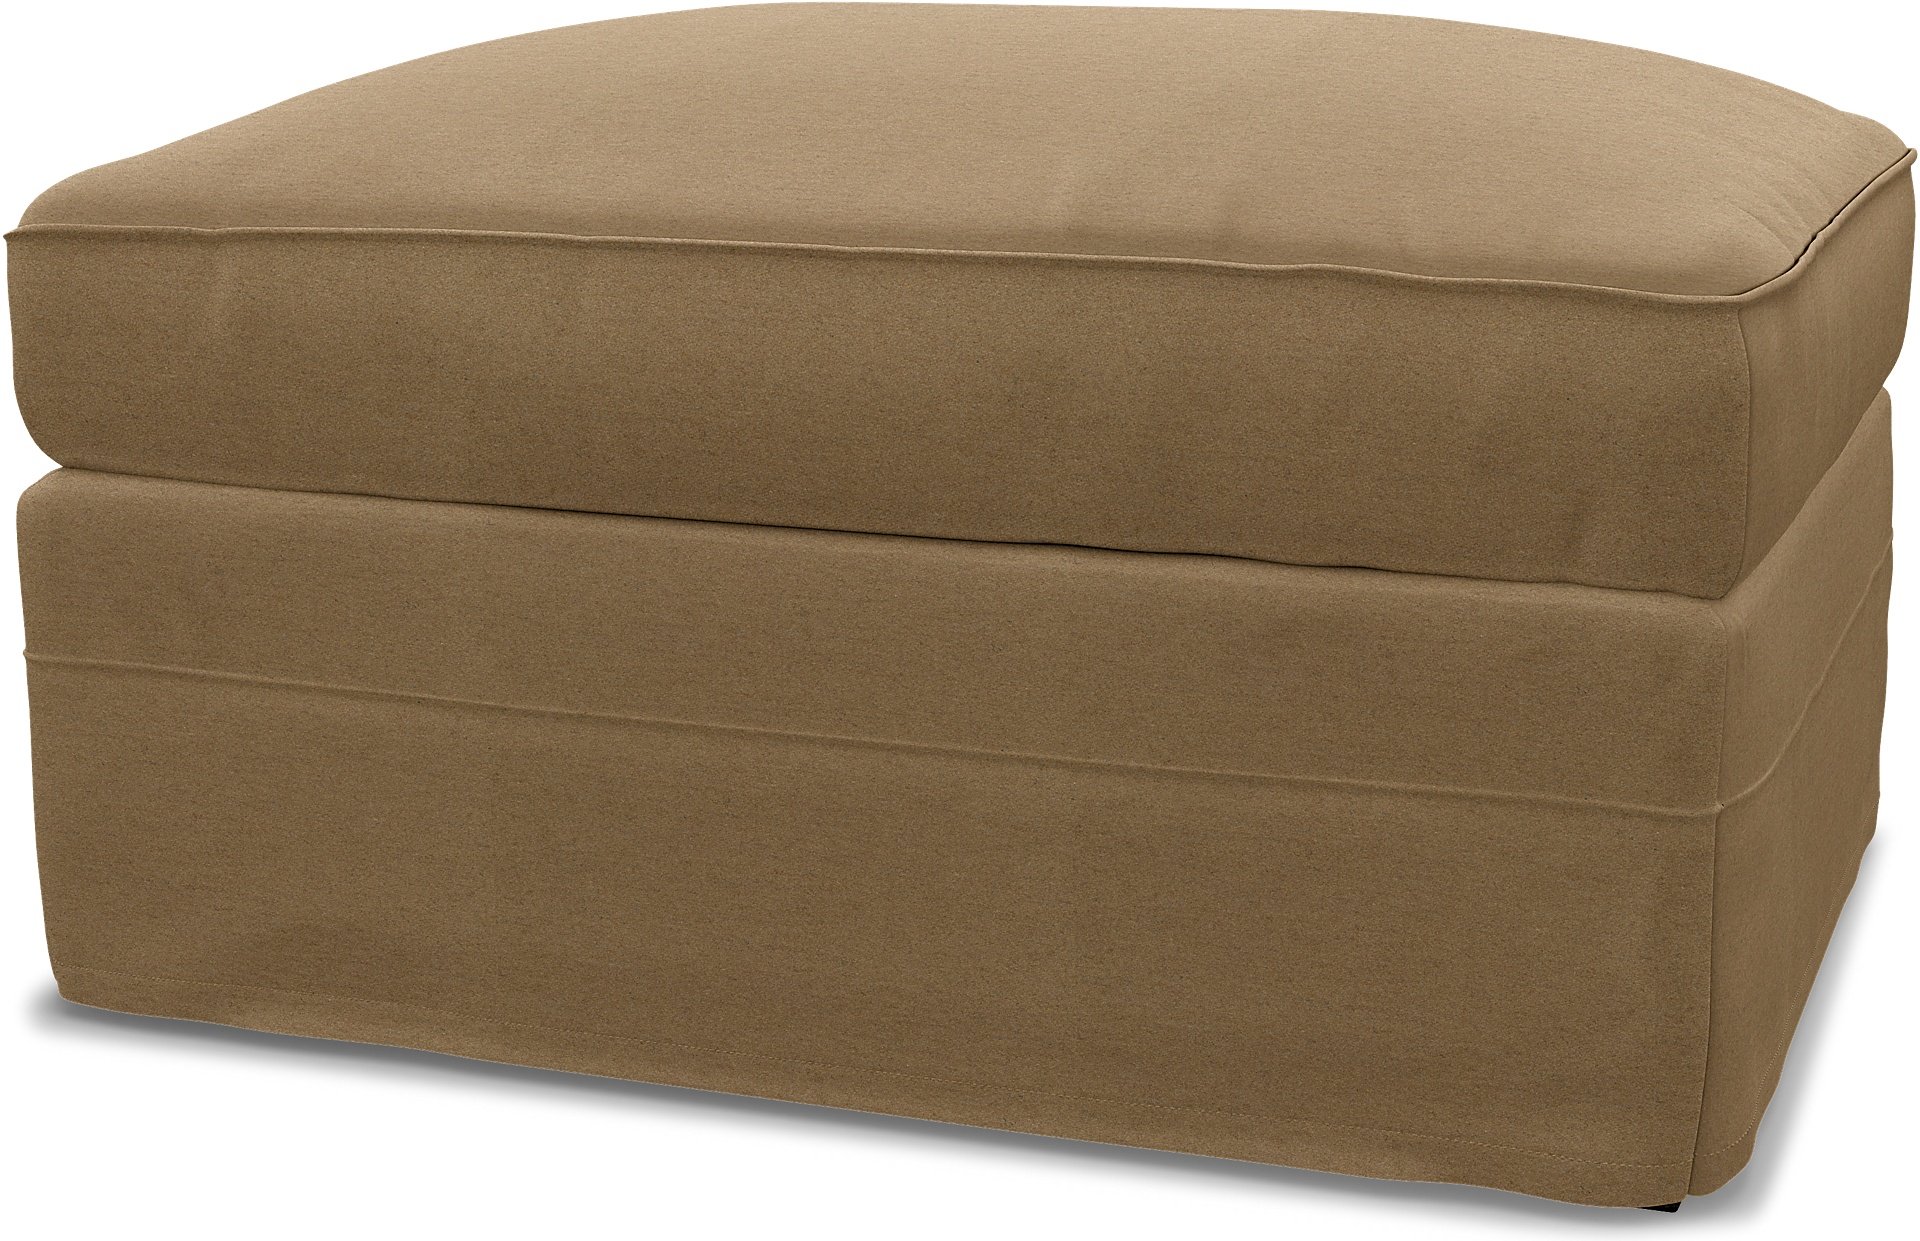 IKEA - Gronlid Footstool with Storage Cover, Sand, Wool - Bemz